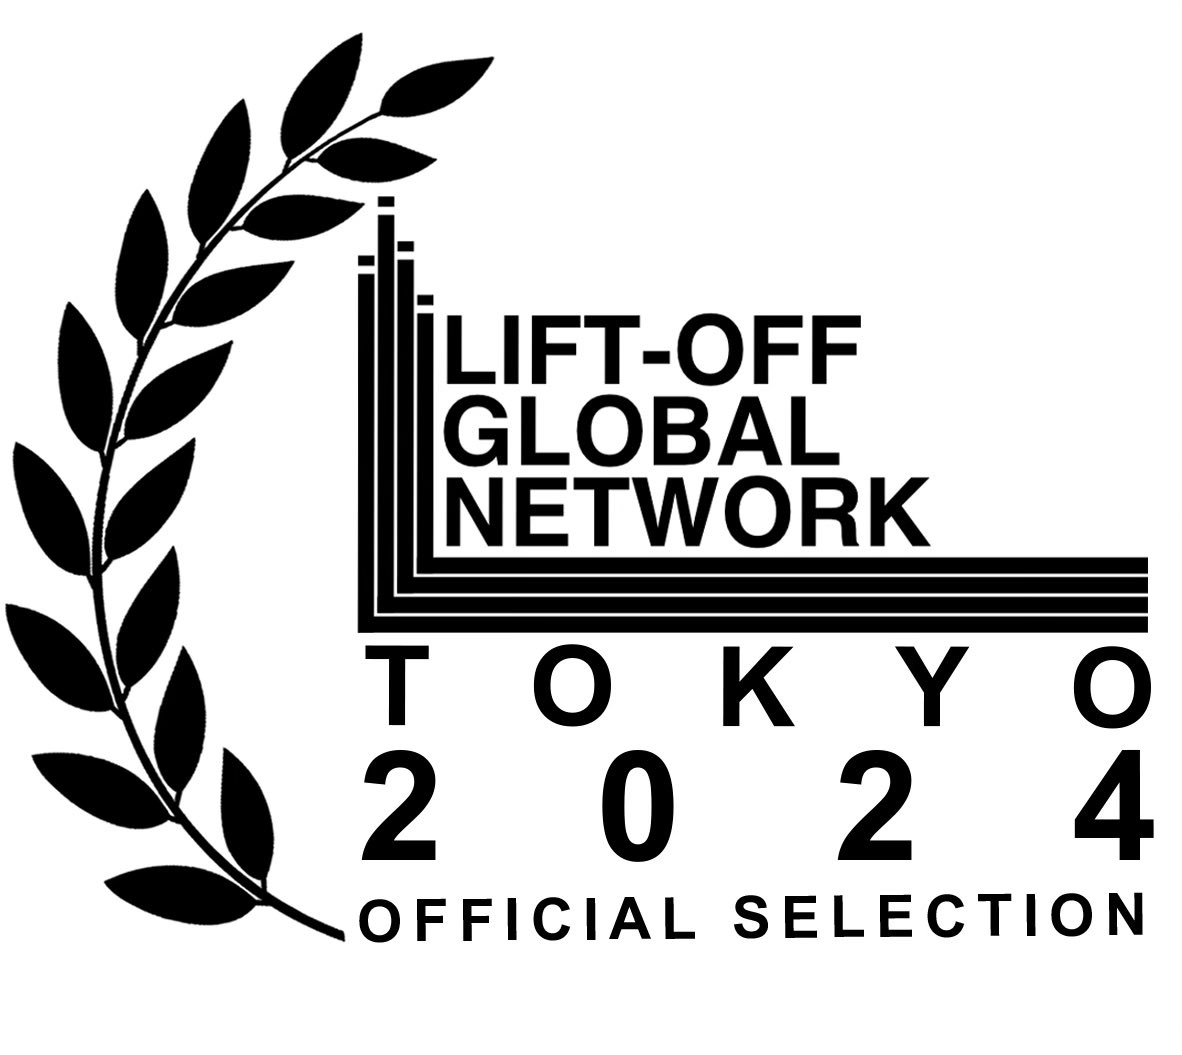 Thrilled to announce that UK Ugly Man has been officially selected by @liftoffnetwork for the Tokyo Film Festival! Watch this space! #liftoff #filmfestival #ukuglyman #indiefilm